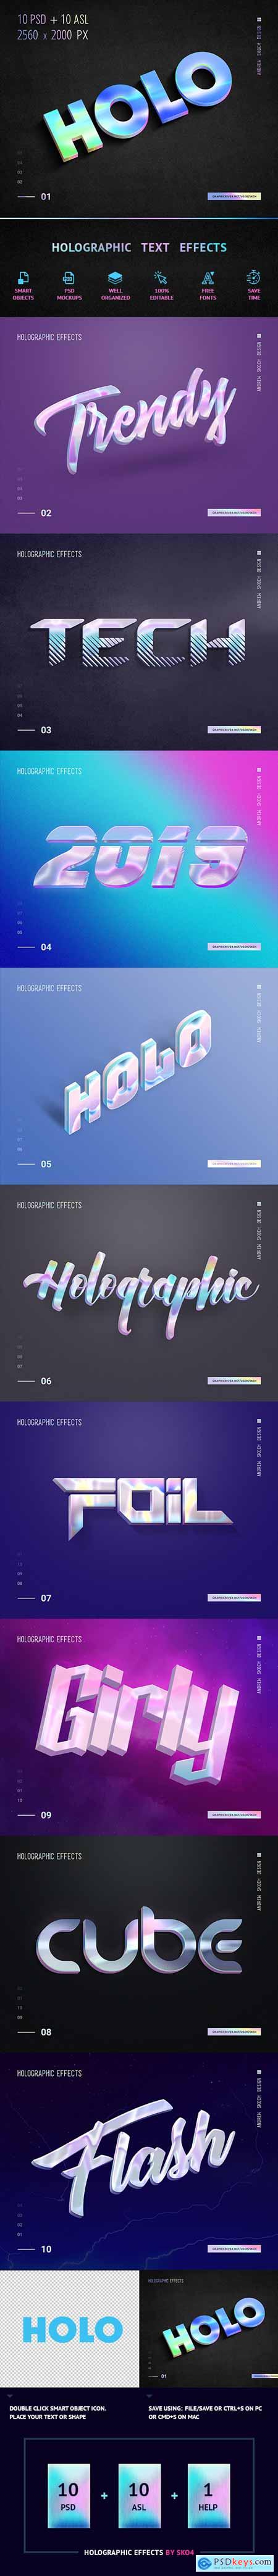 Holographic Text - 10 PSD 23178255